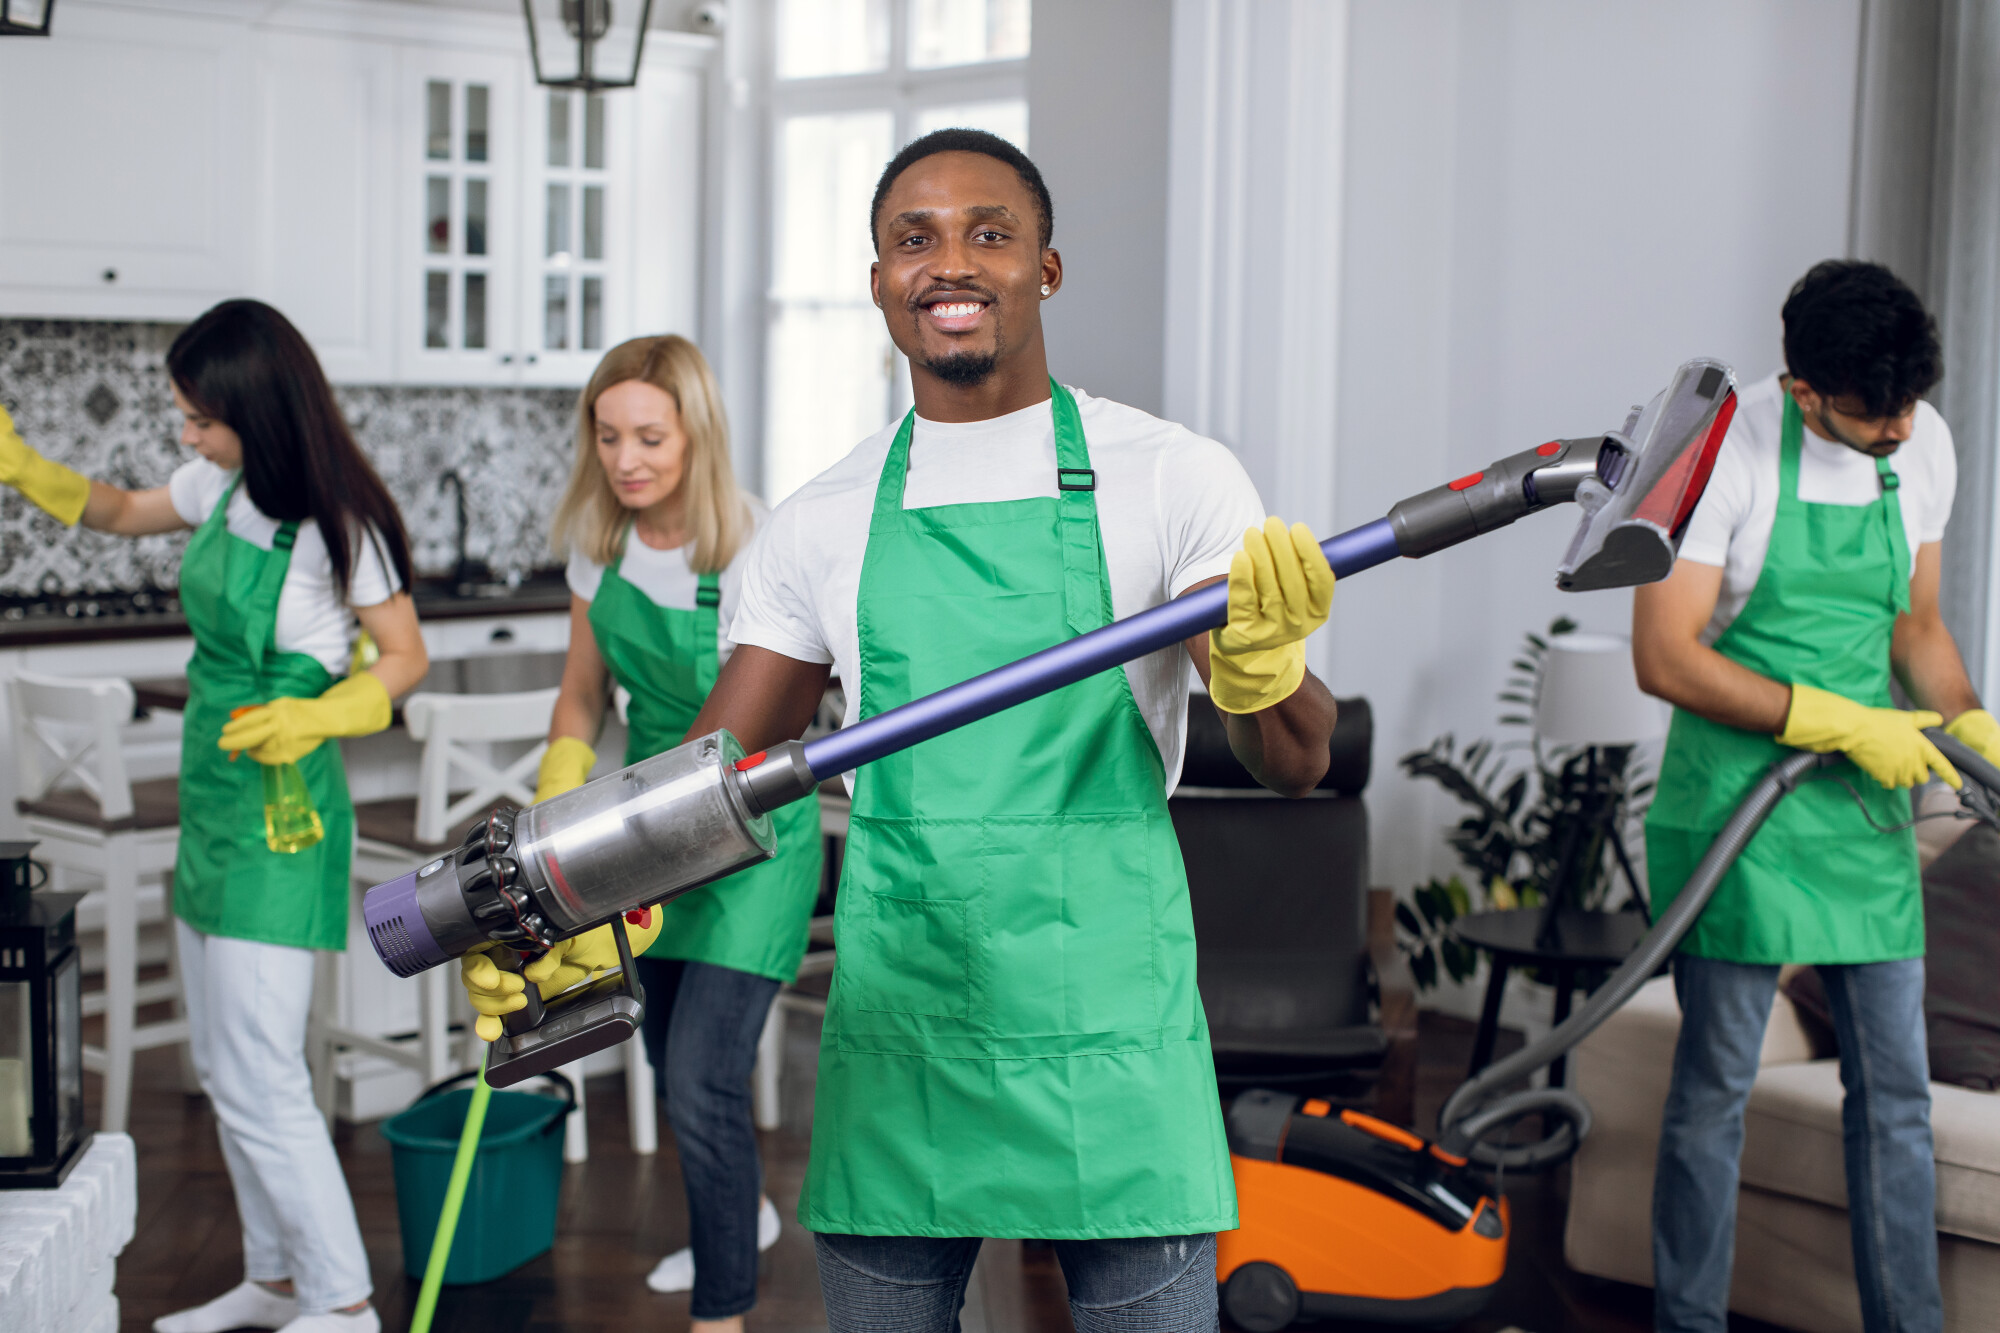 deep cleaning house service